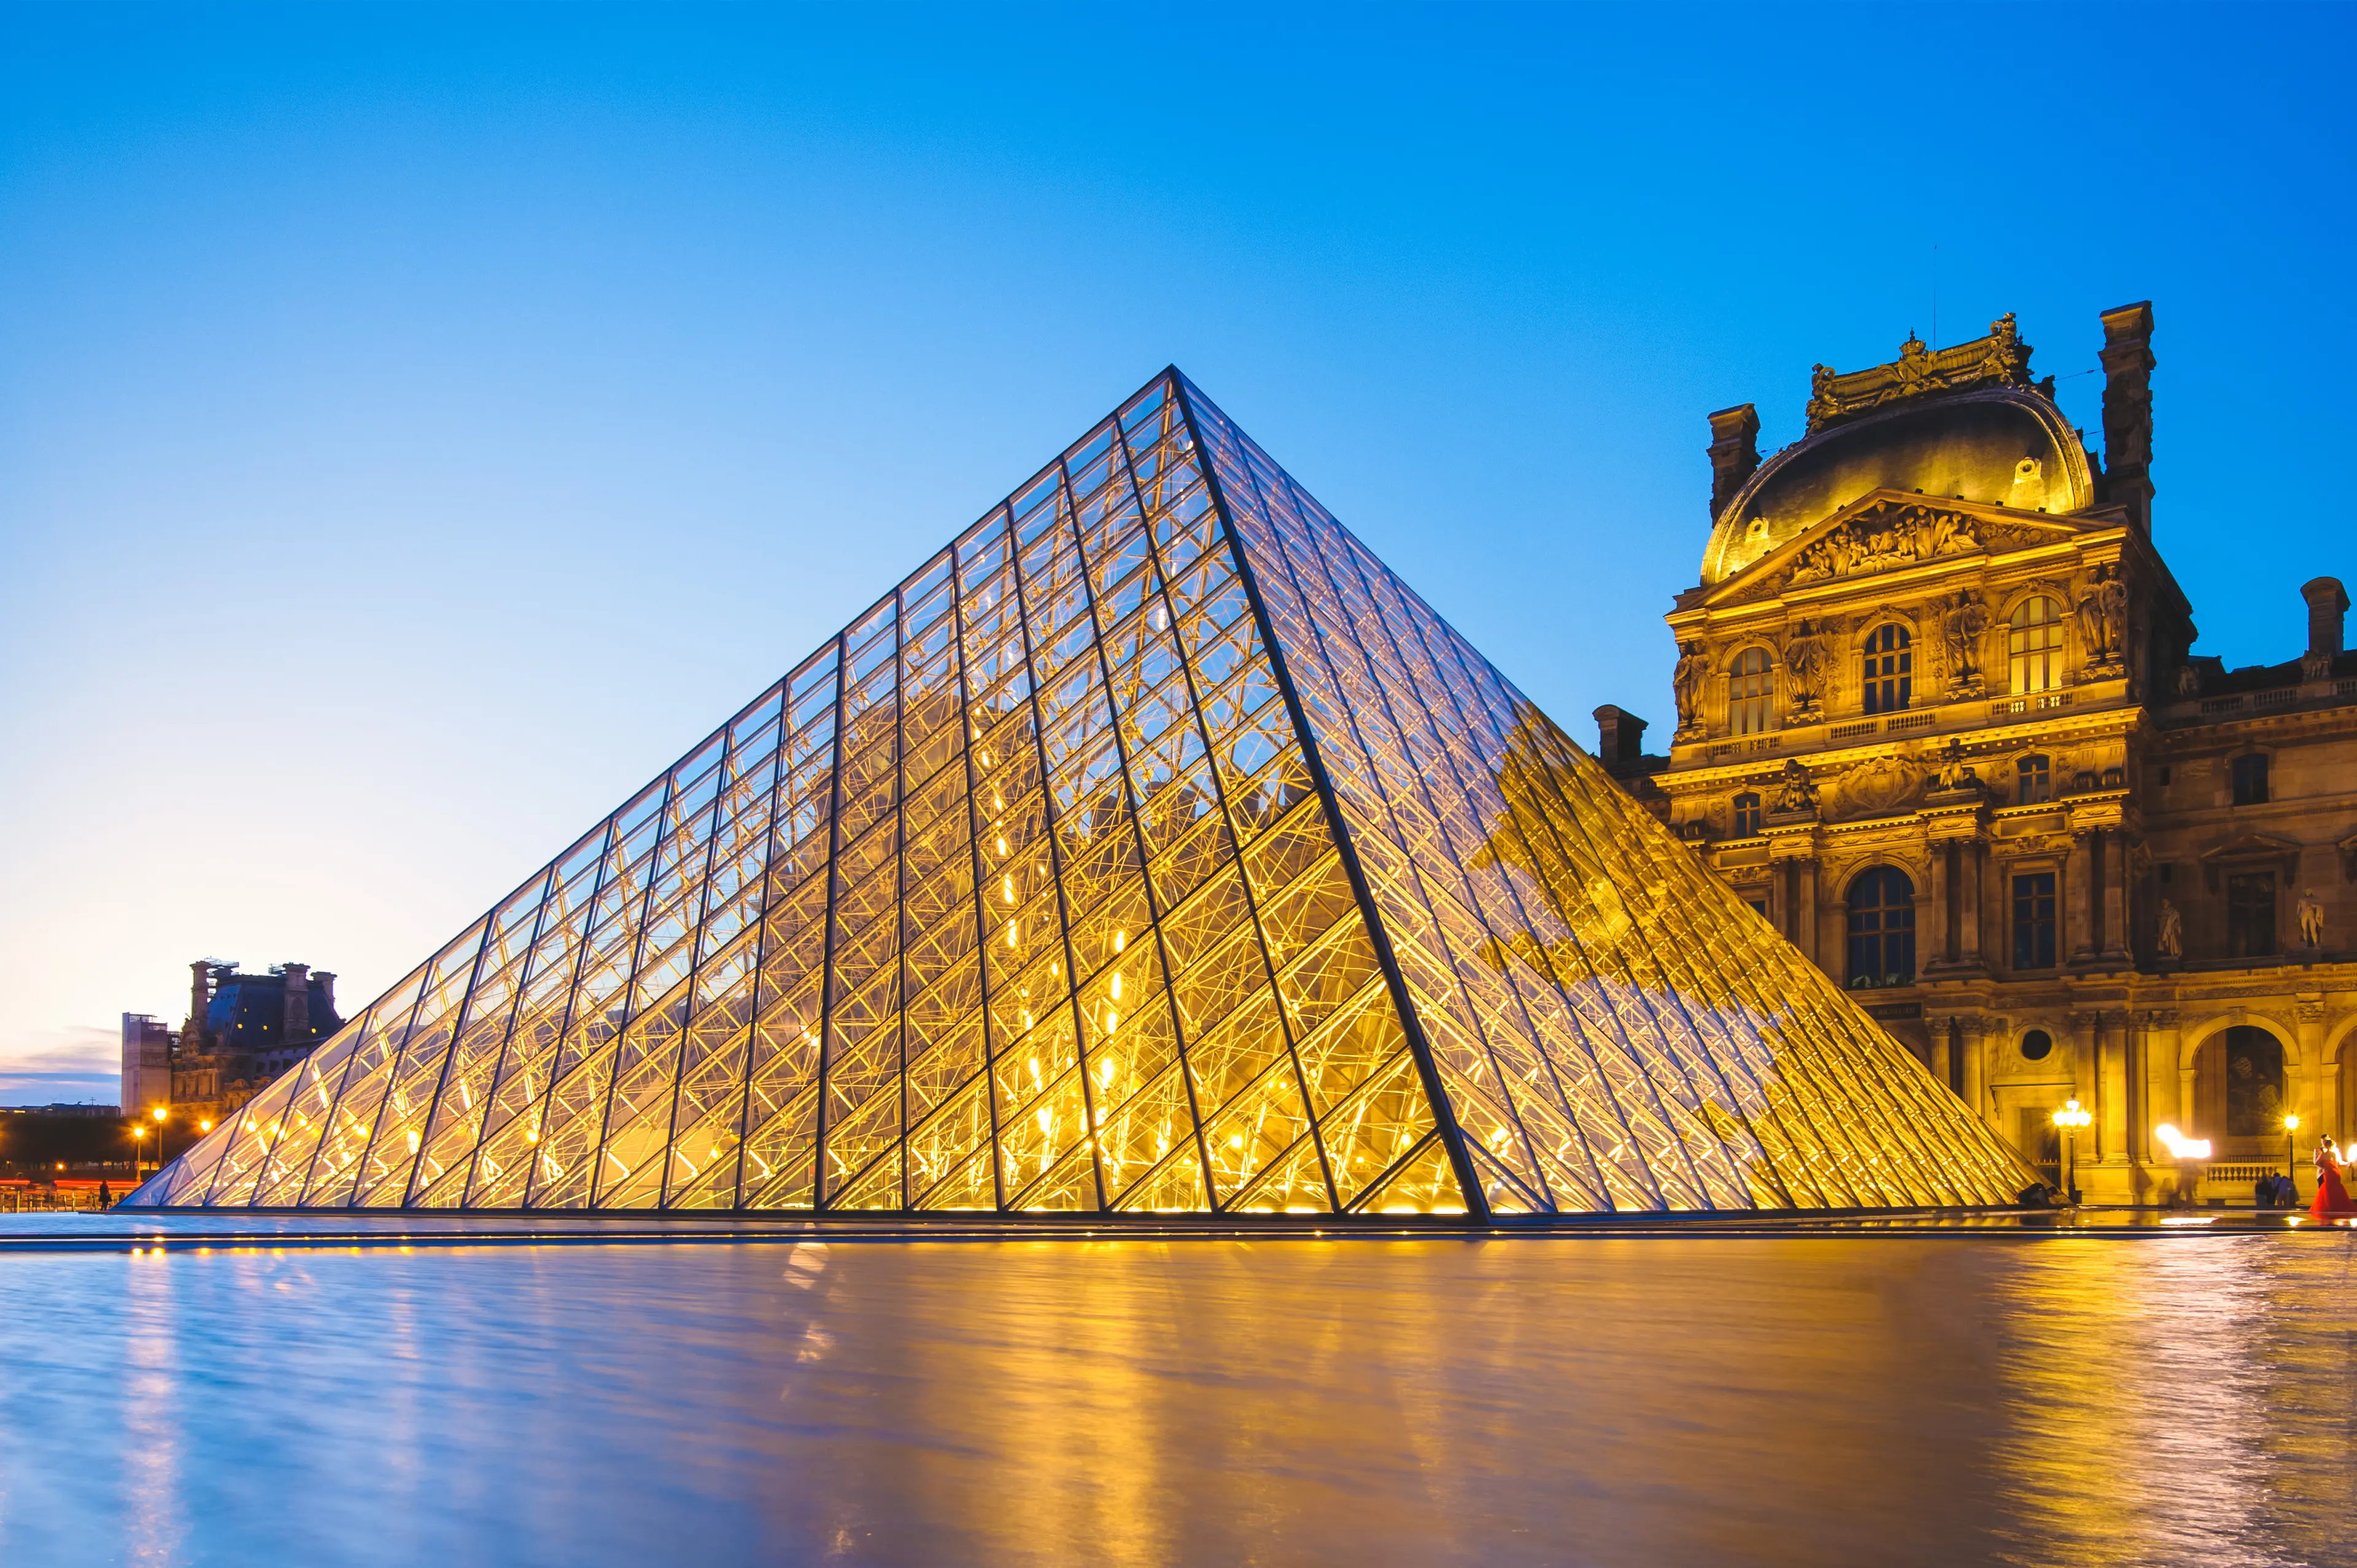 The Louvre Palace and the Pyramid